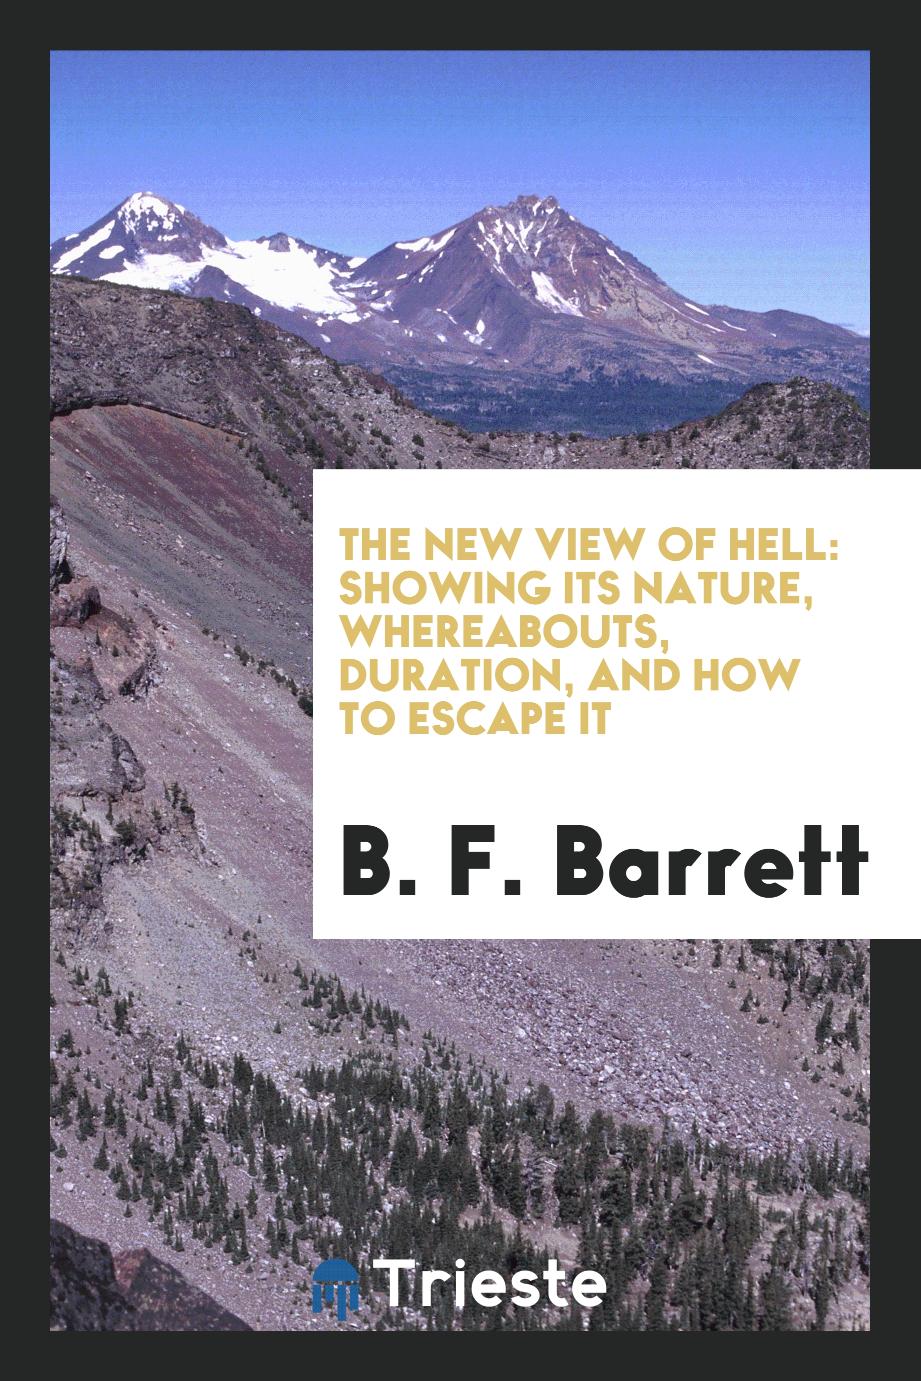 The New view of hell: showing its nature, whereabouts, duration, and how to escape it